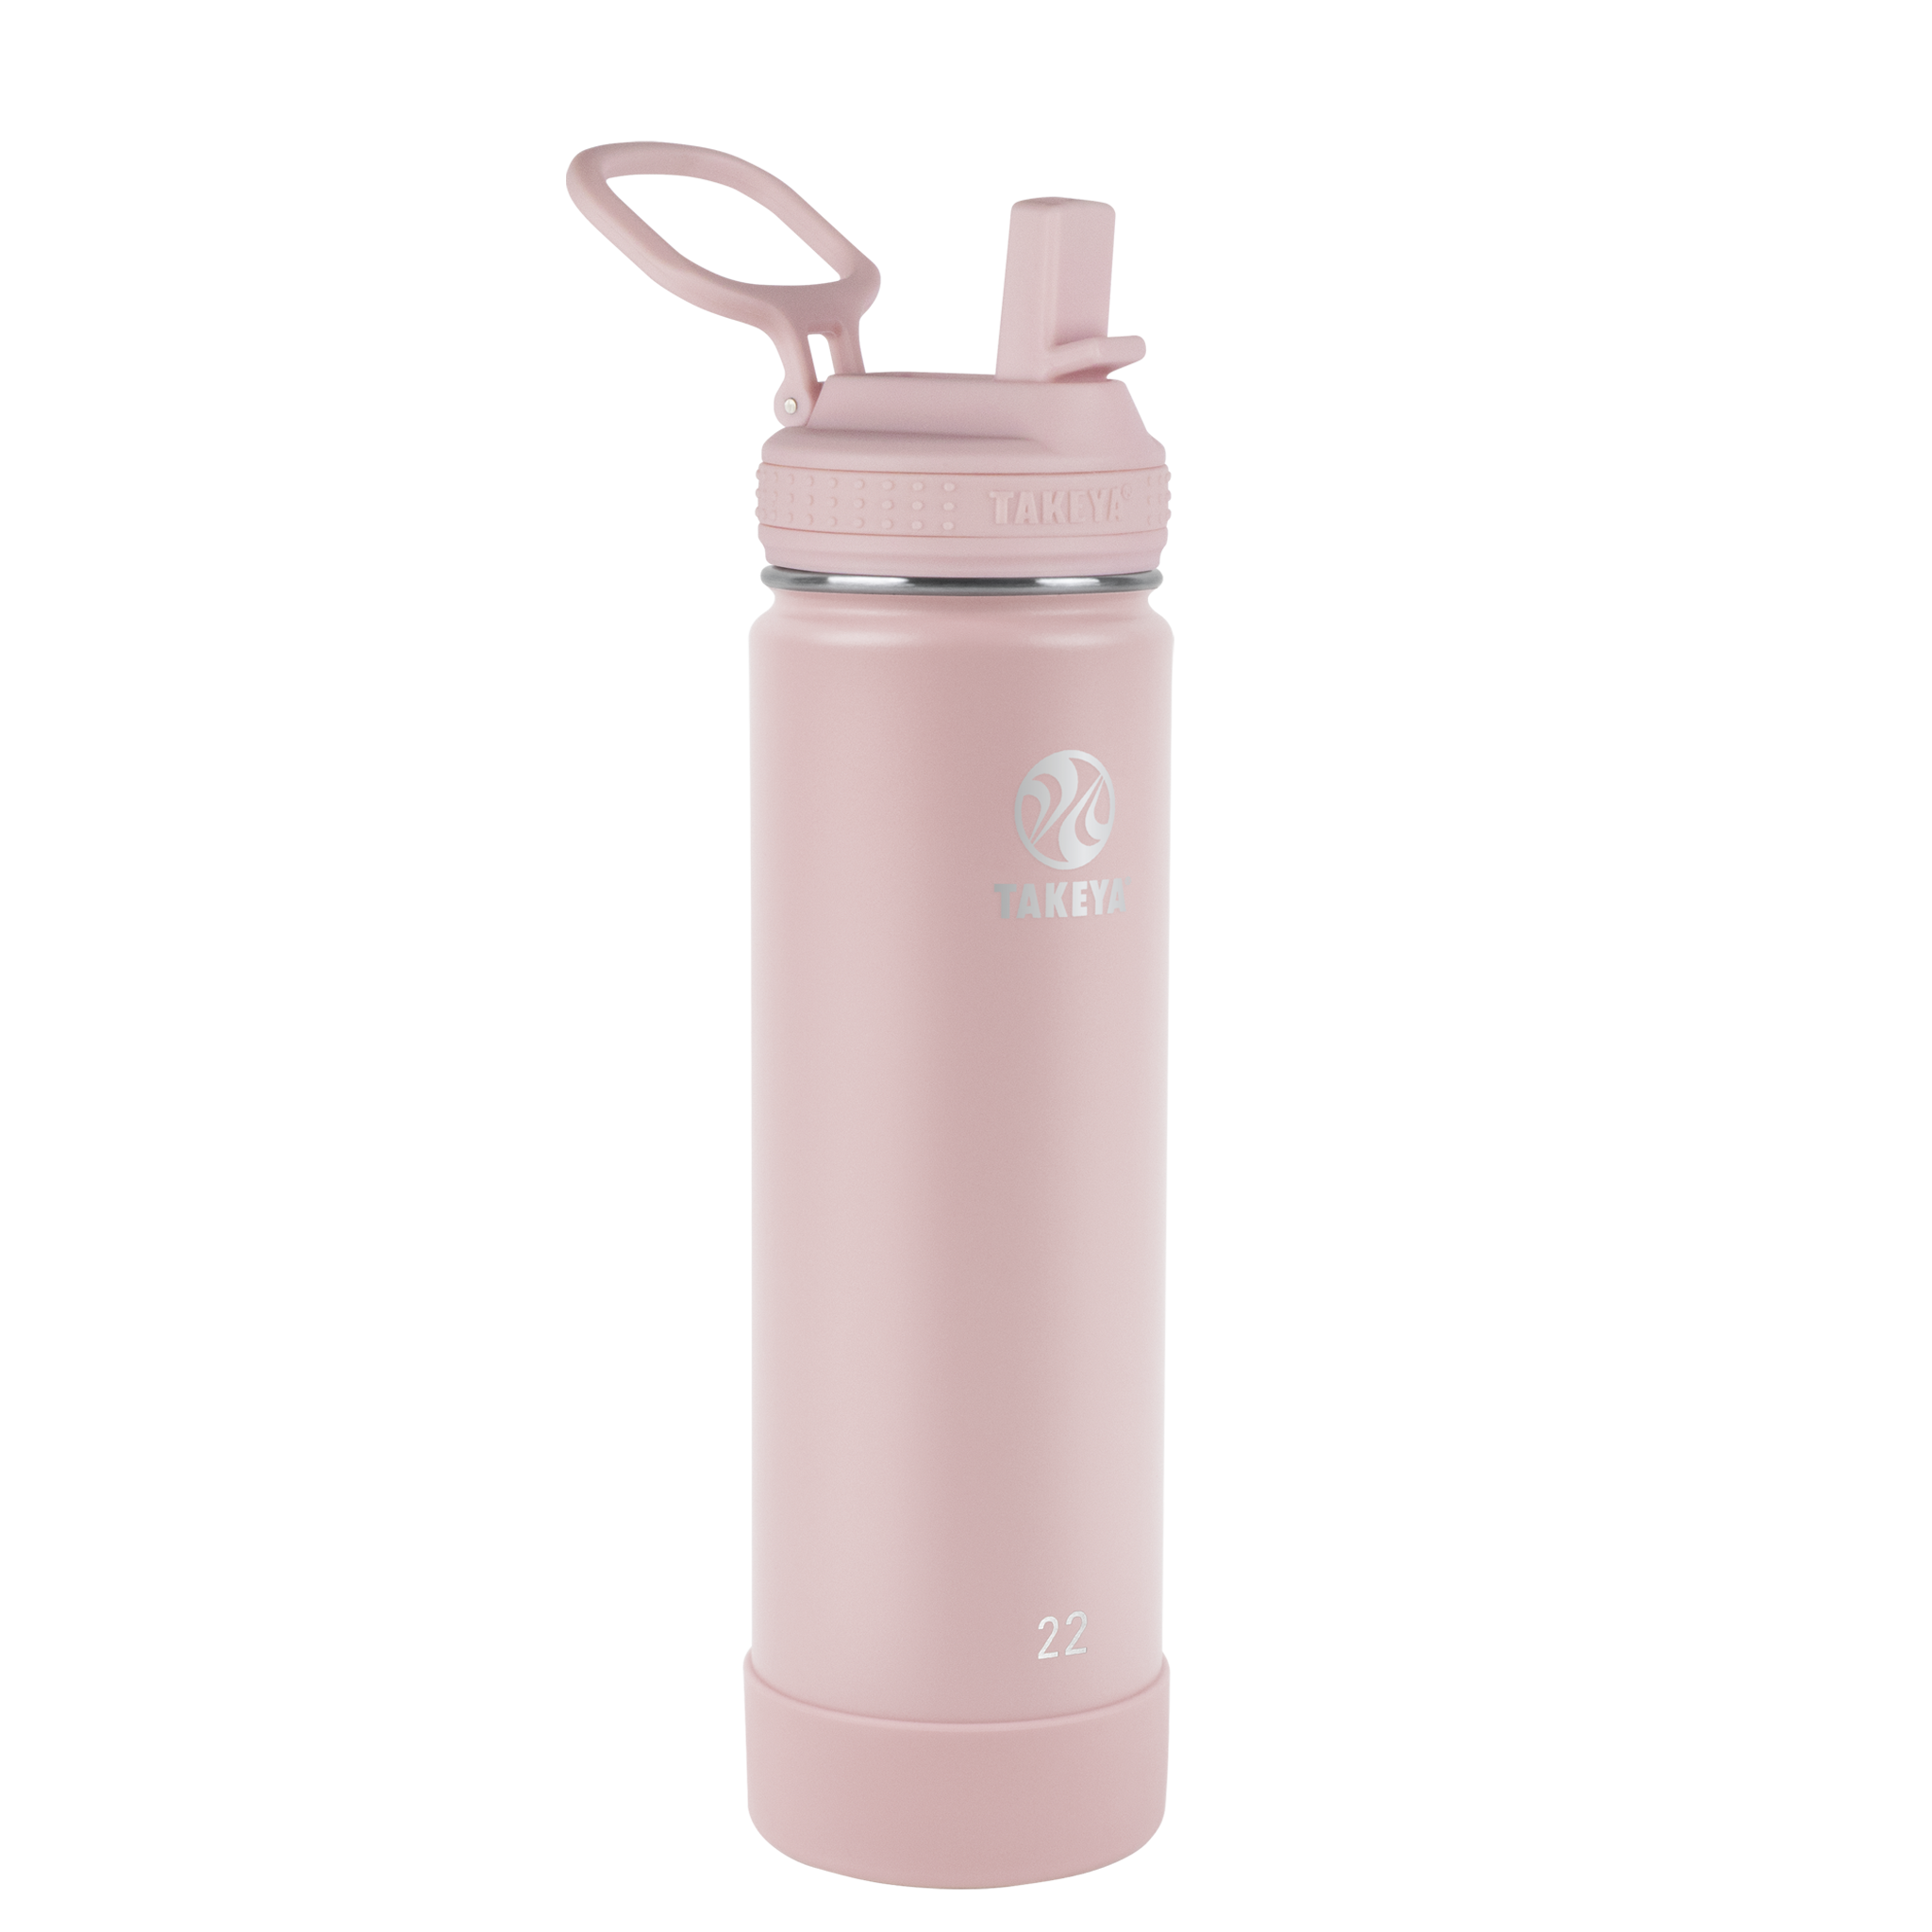 Takeya 22-fl oz Stainless Steel Insulated Water Bottle at Lowes.com